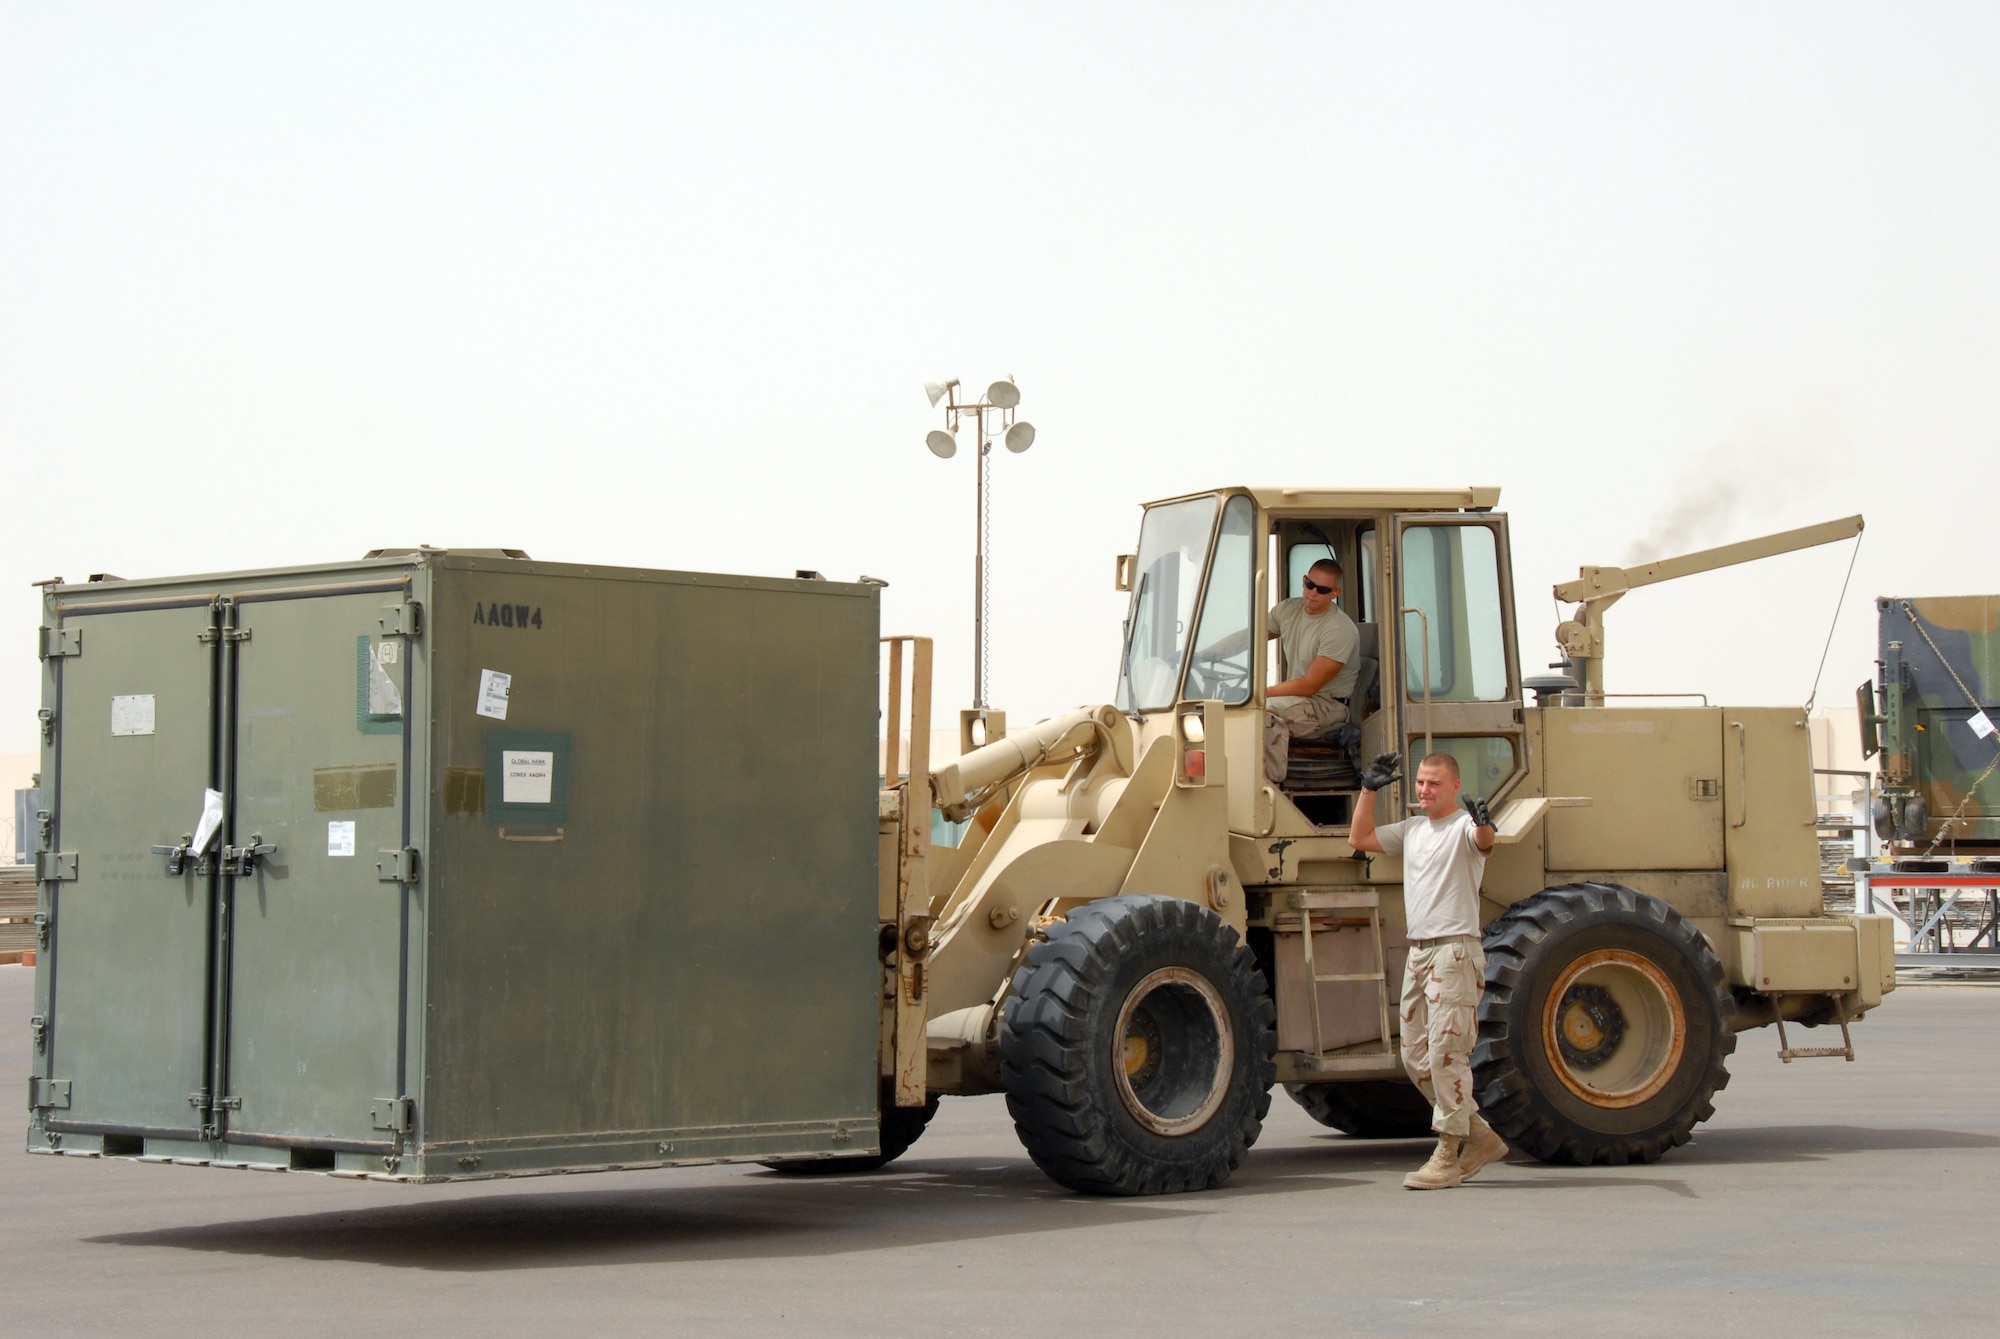 Senior Airman Thomas Elswick (left), and Staff Sgt. Matthew Drangstveit (right), both from the 380th Expeditionary Logistics Readiness Squadron's Air
Terminal Operation Center, load a pallet on a 60K-Loader July, 2. (U.S. Air Force photo/Airman 1st Class Kelly LeGuillon)